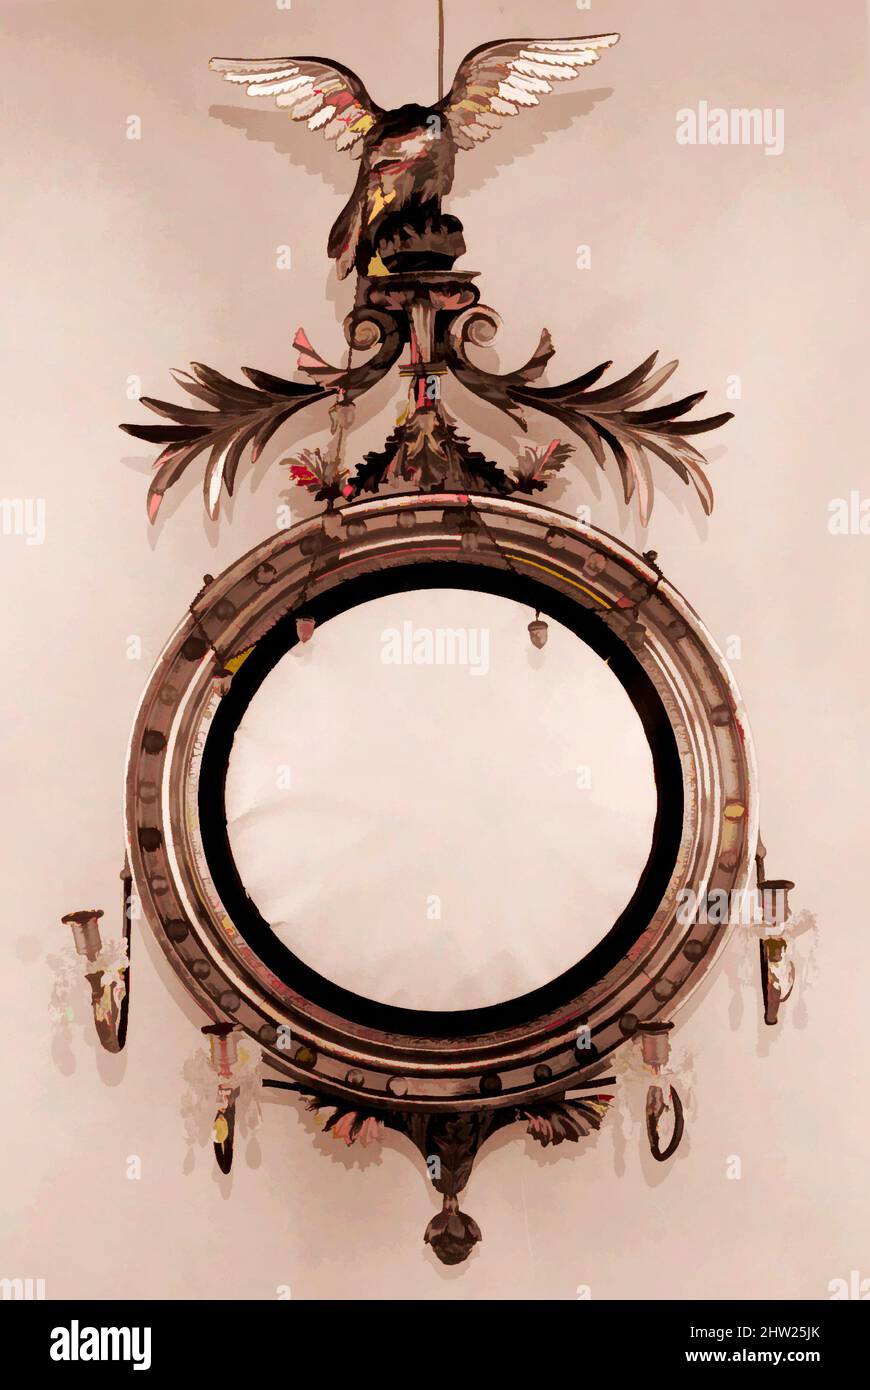 Art inspired by Girandole, 1815–20, Made in New York, New York, United States, American, Gilded gesso, mirror glass with white pine, H. 54 in. (137.2 cm); Diam. 28 in. (71.1 cm), Furniture, This girandole mirror and its mate were made for the Albany townhouse of Stephen Van Rensselaer, Classic works modernized by Artotop with a splash of modernity. Shapes, color and value, eye-catching visual impact on art. Emotions through freedom of artworks in a contemporary way. A timeless message pursuing a wildly creative new direction. Artists turning to the digital medium and creating the Artotop NFT Stock Photo